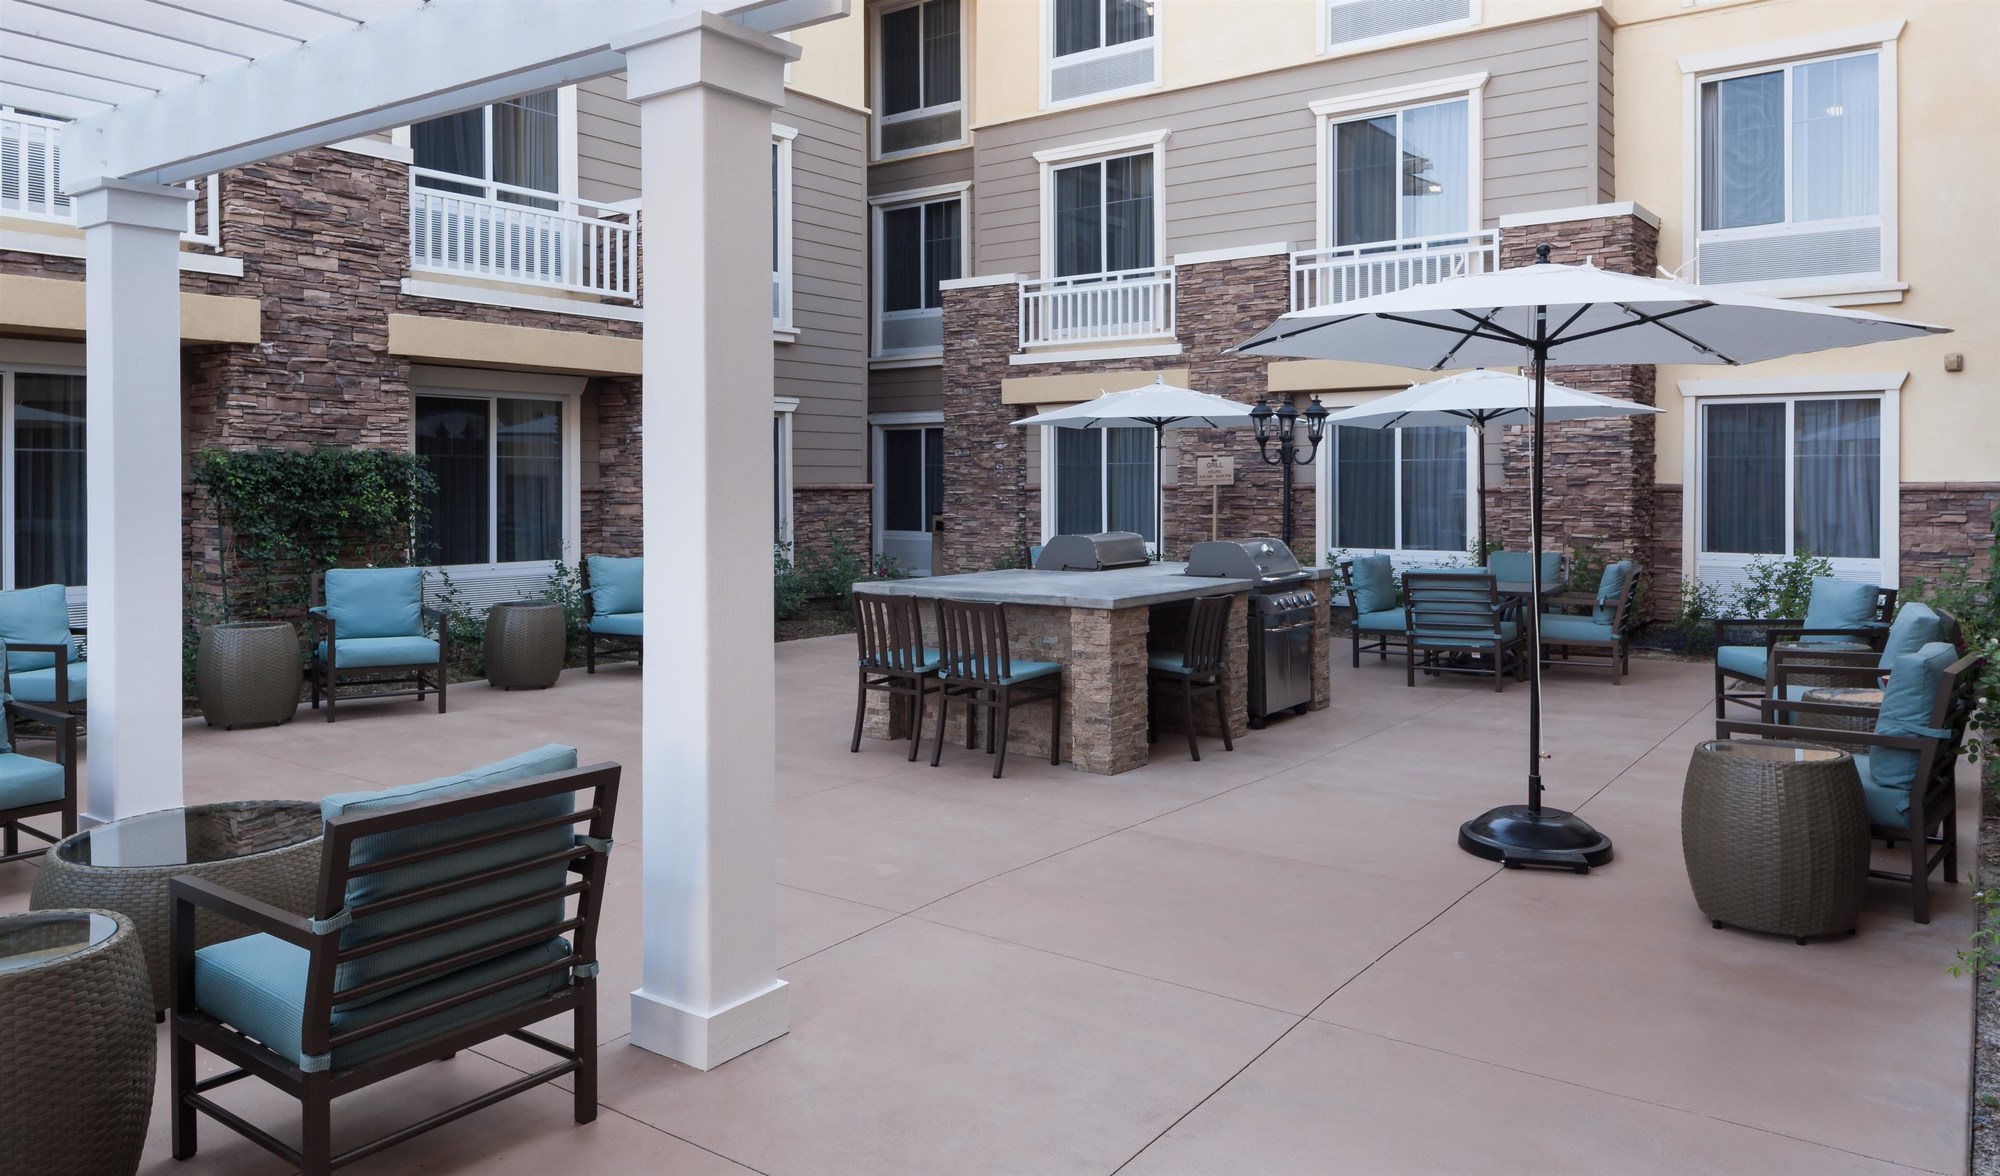 Homewood Suites by Hilton Agoura Hills